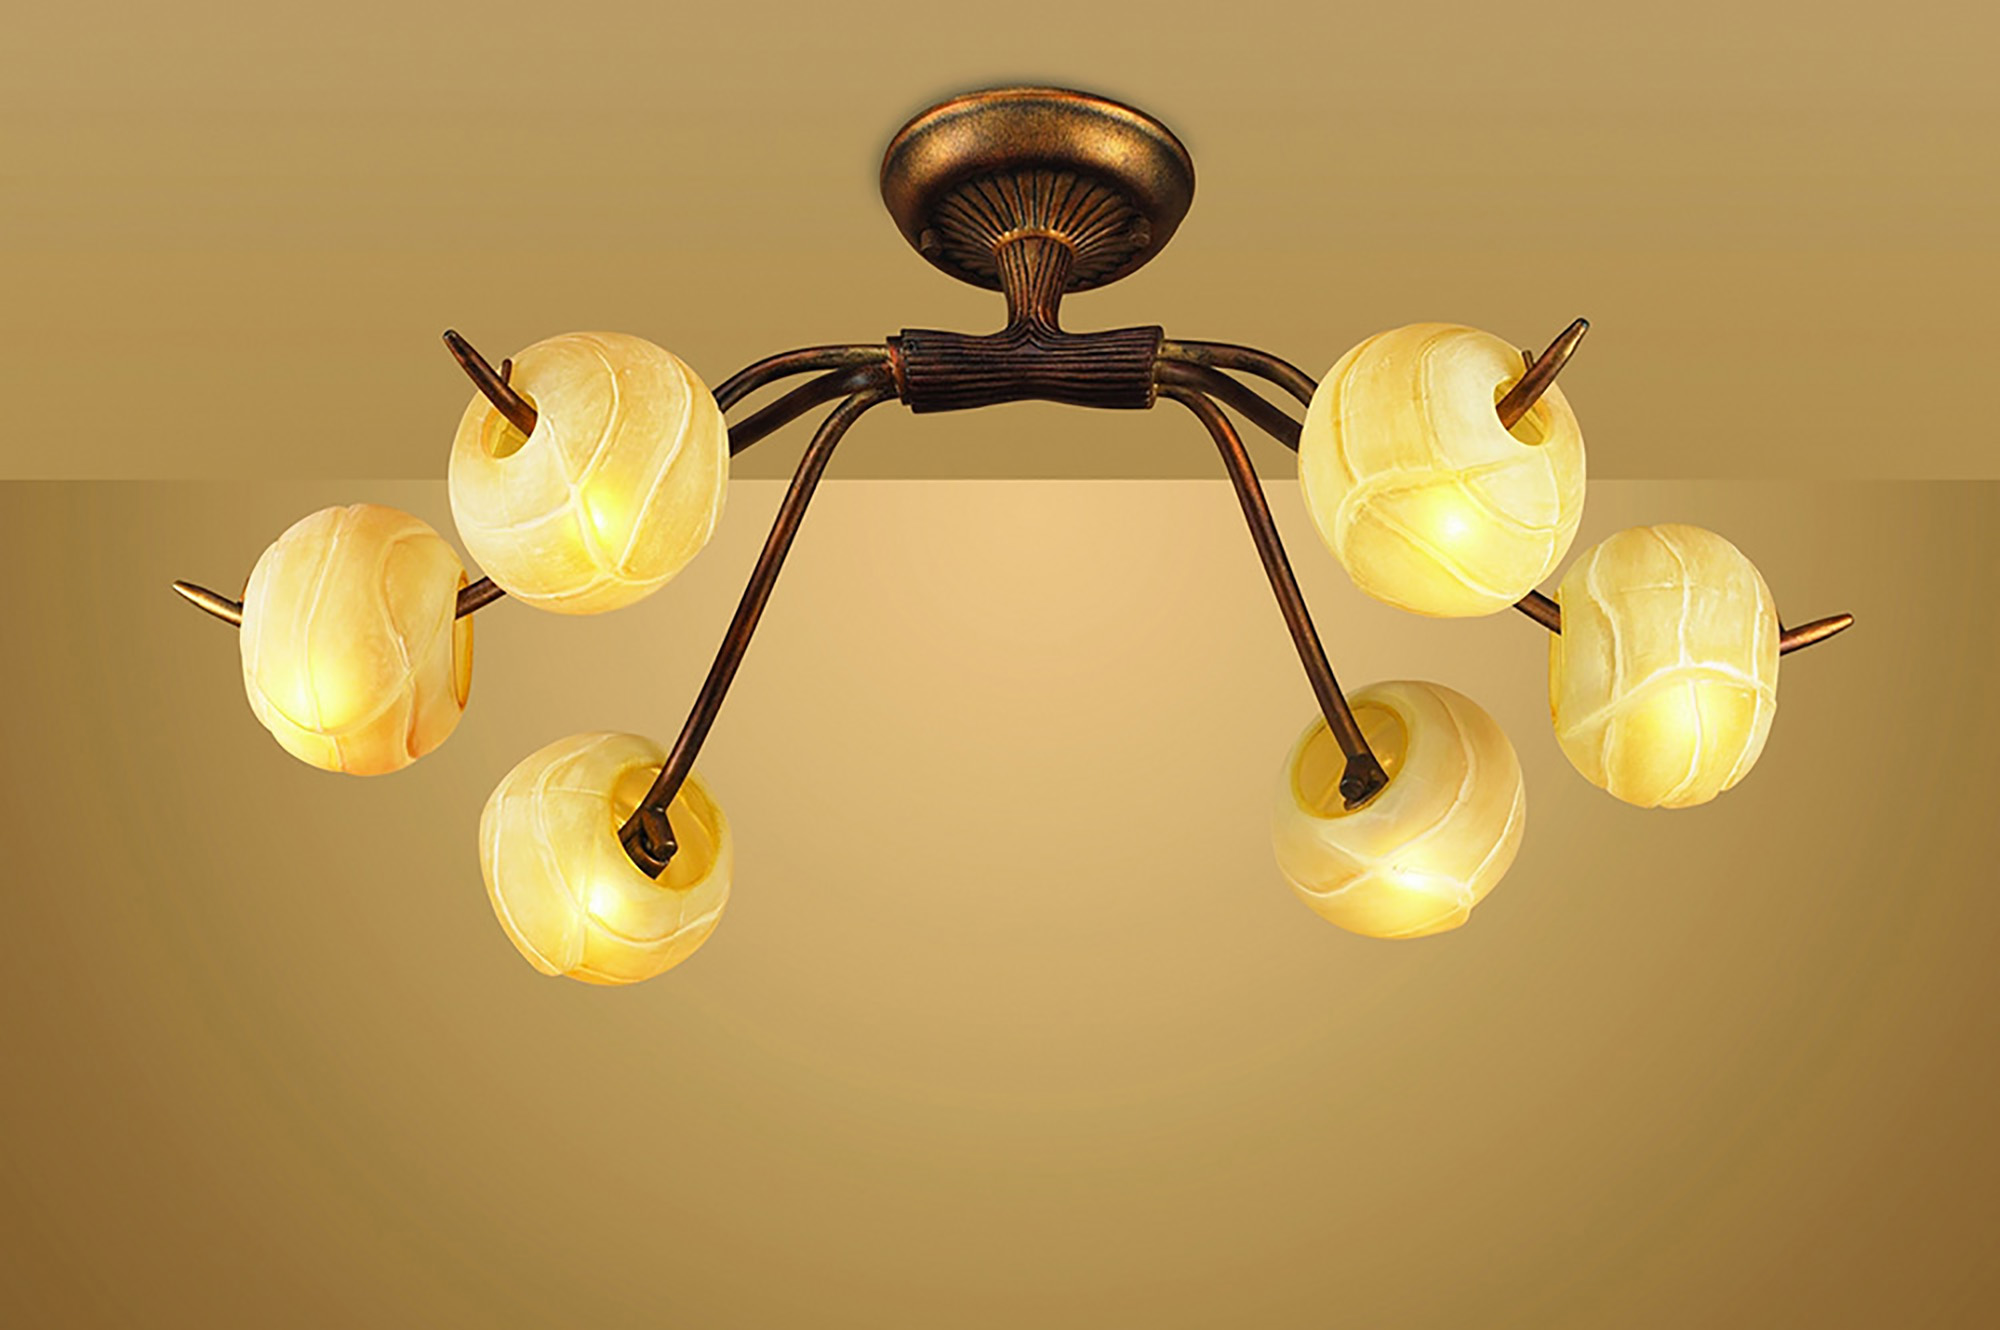 Wave Ceiling Lights Mantra Multi Arm Fittings